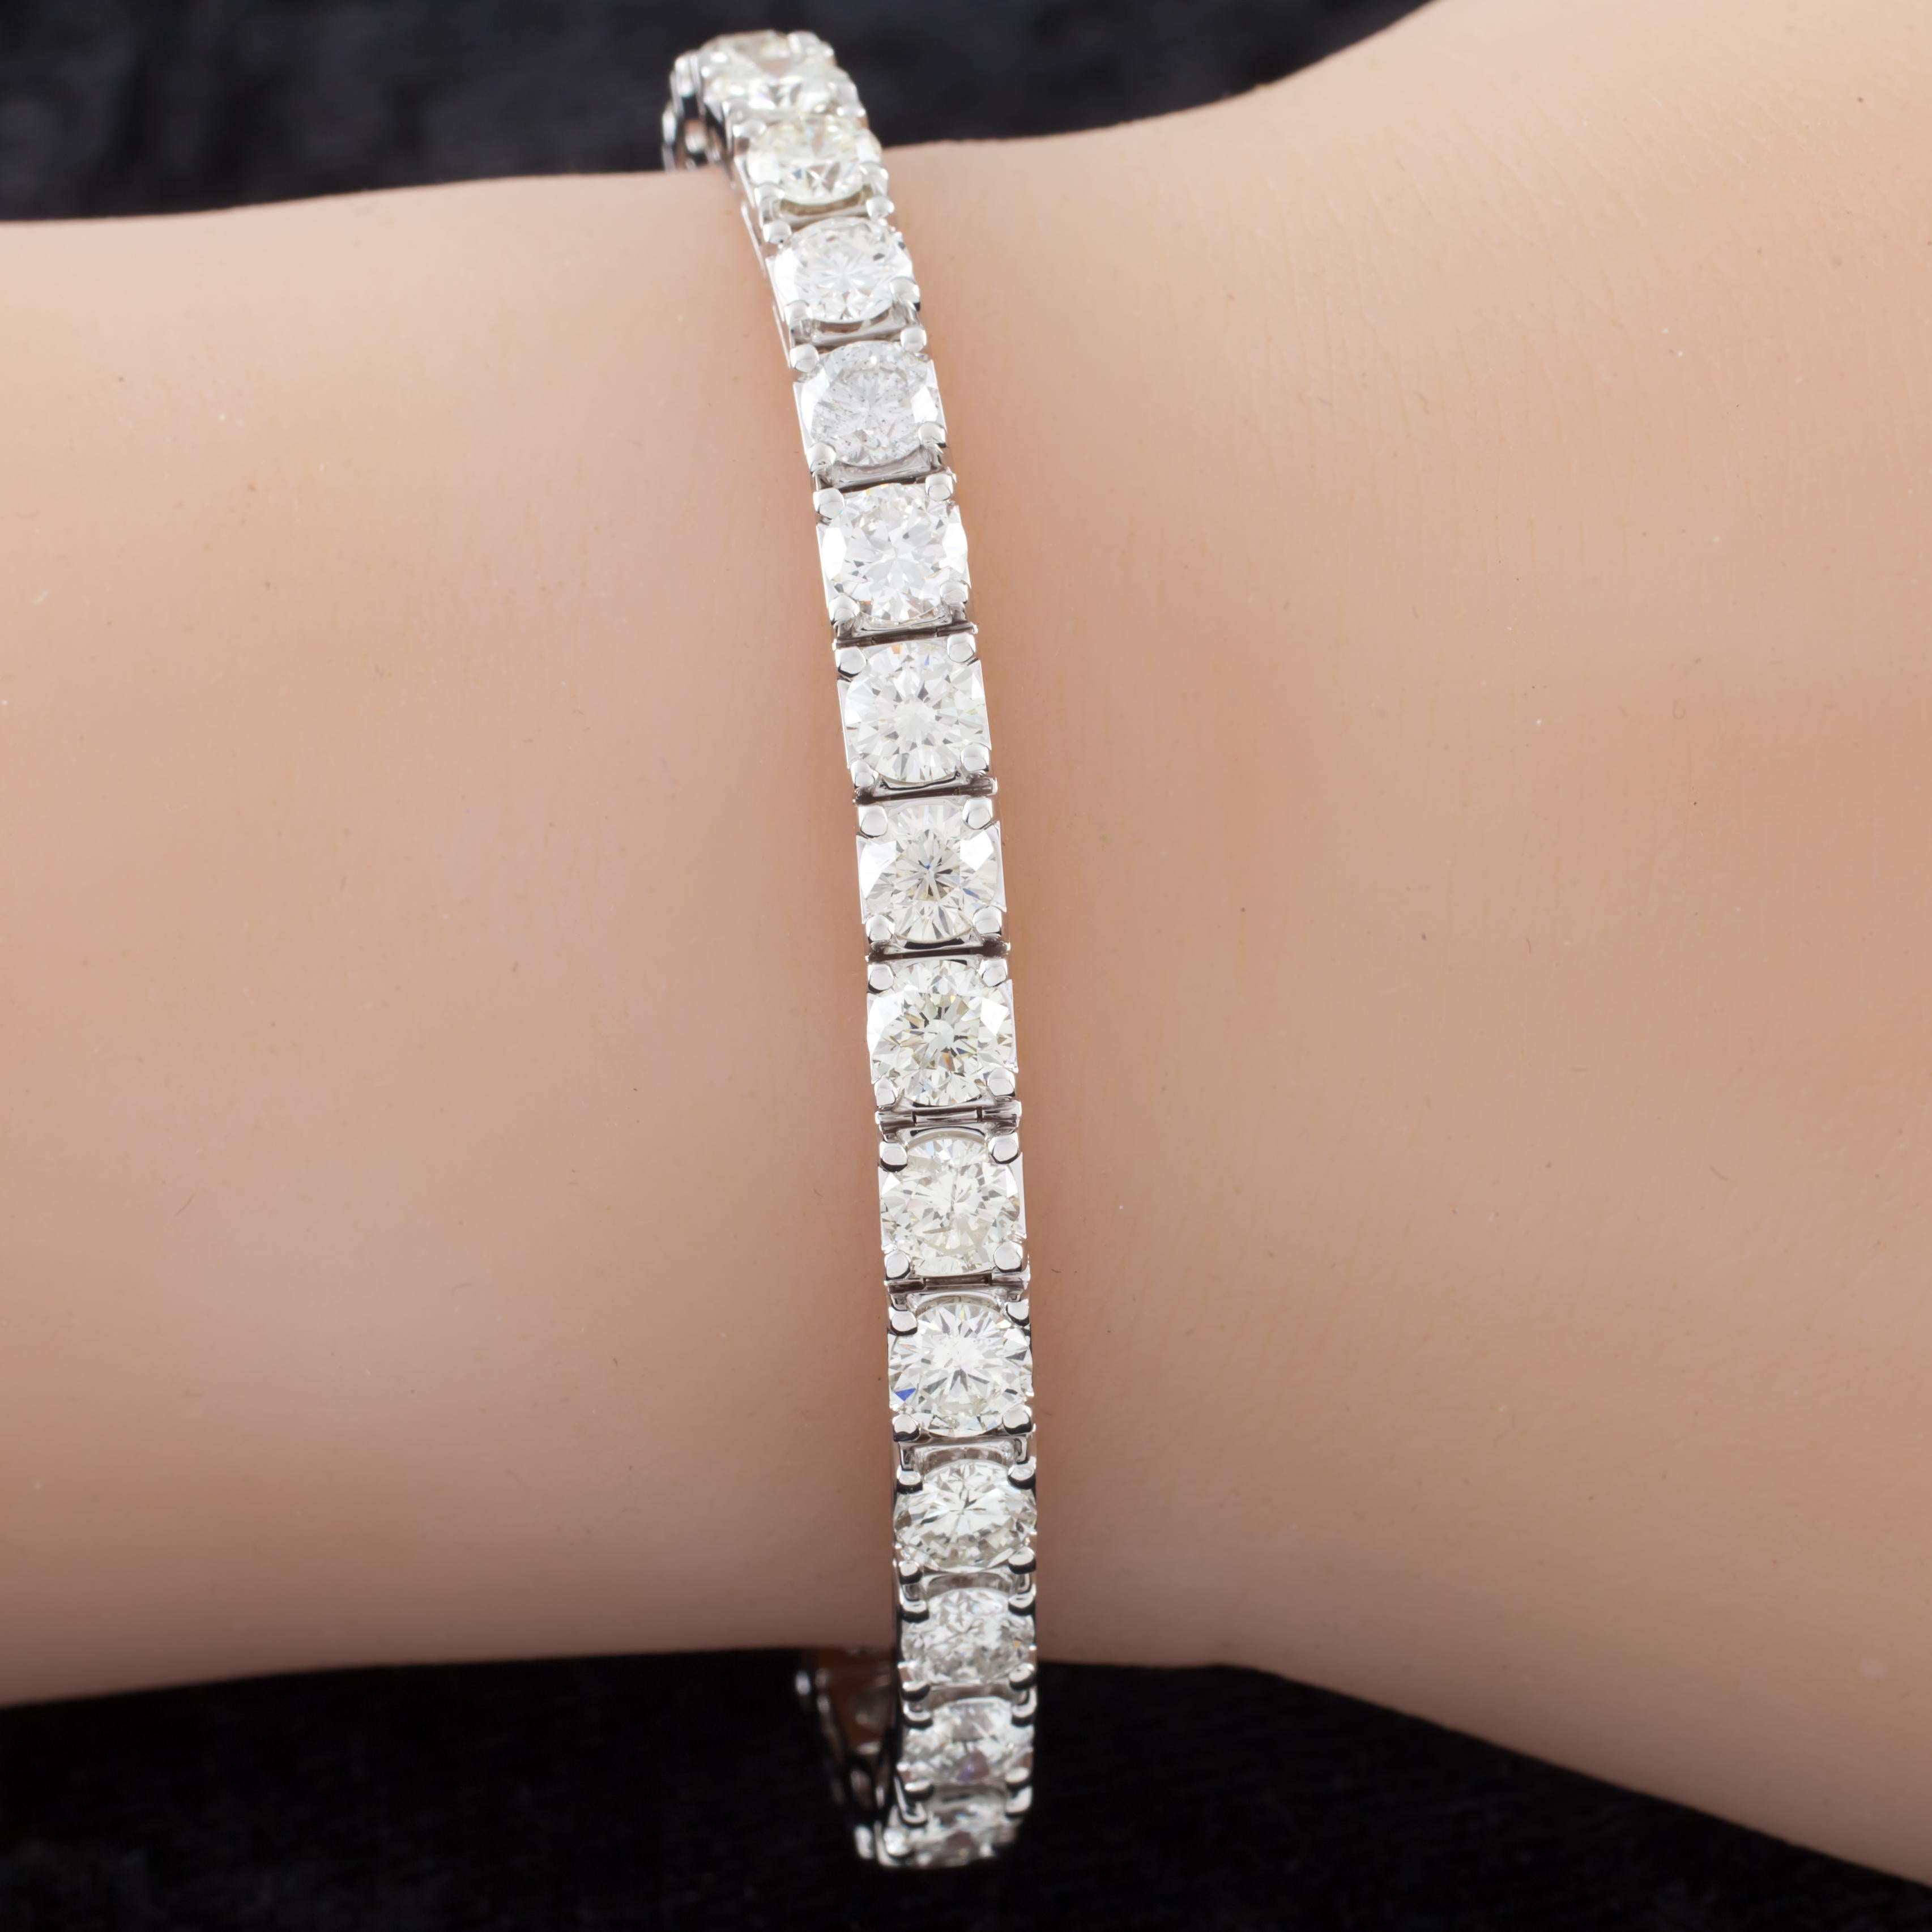 Gorgeous Tennis Bracelet!
Features .40 ct each diamonds
Total Diamond Weight = 13.98 ct
Average Color: I - J
Average Clarity: VS - SI
Total Mass = 21.7 grams
Total Length = 7